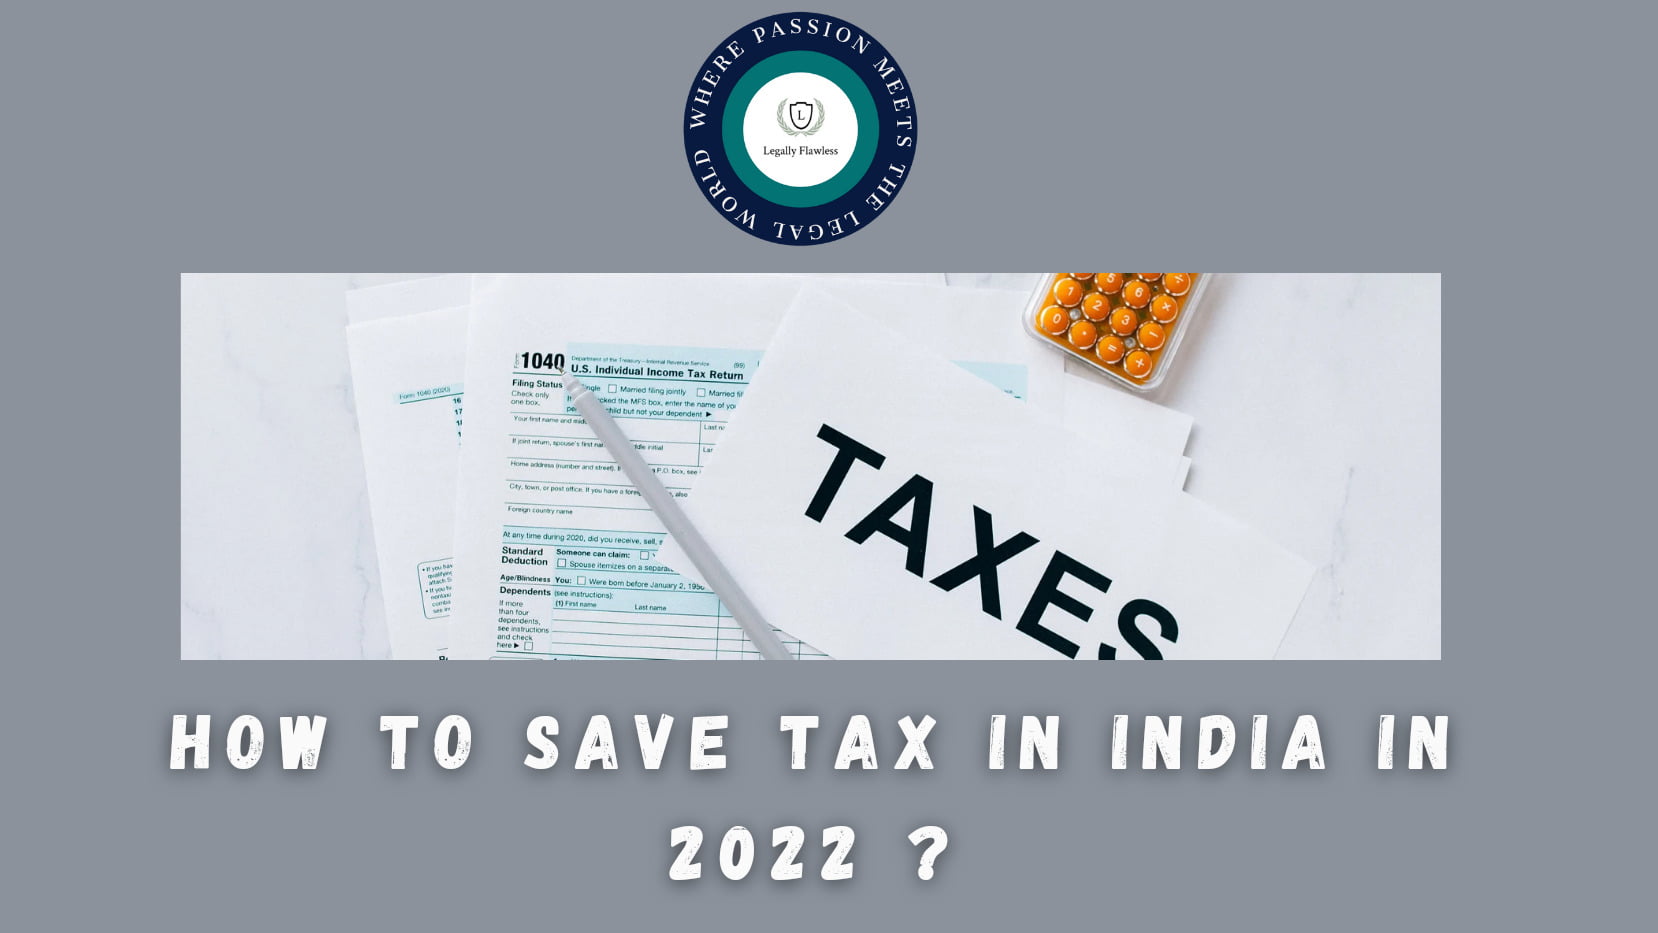 how-to-save-tax-in-india-in-2022-legally-flawless